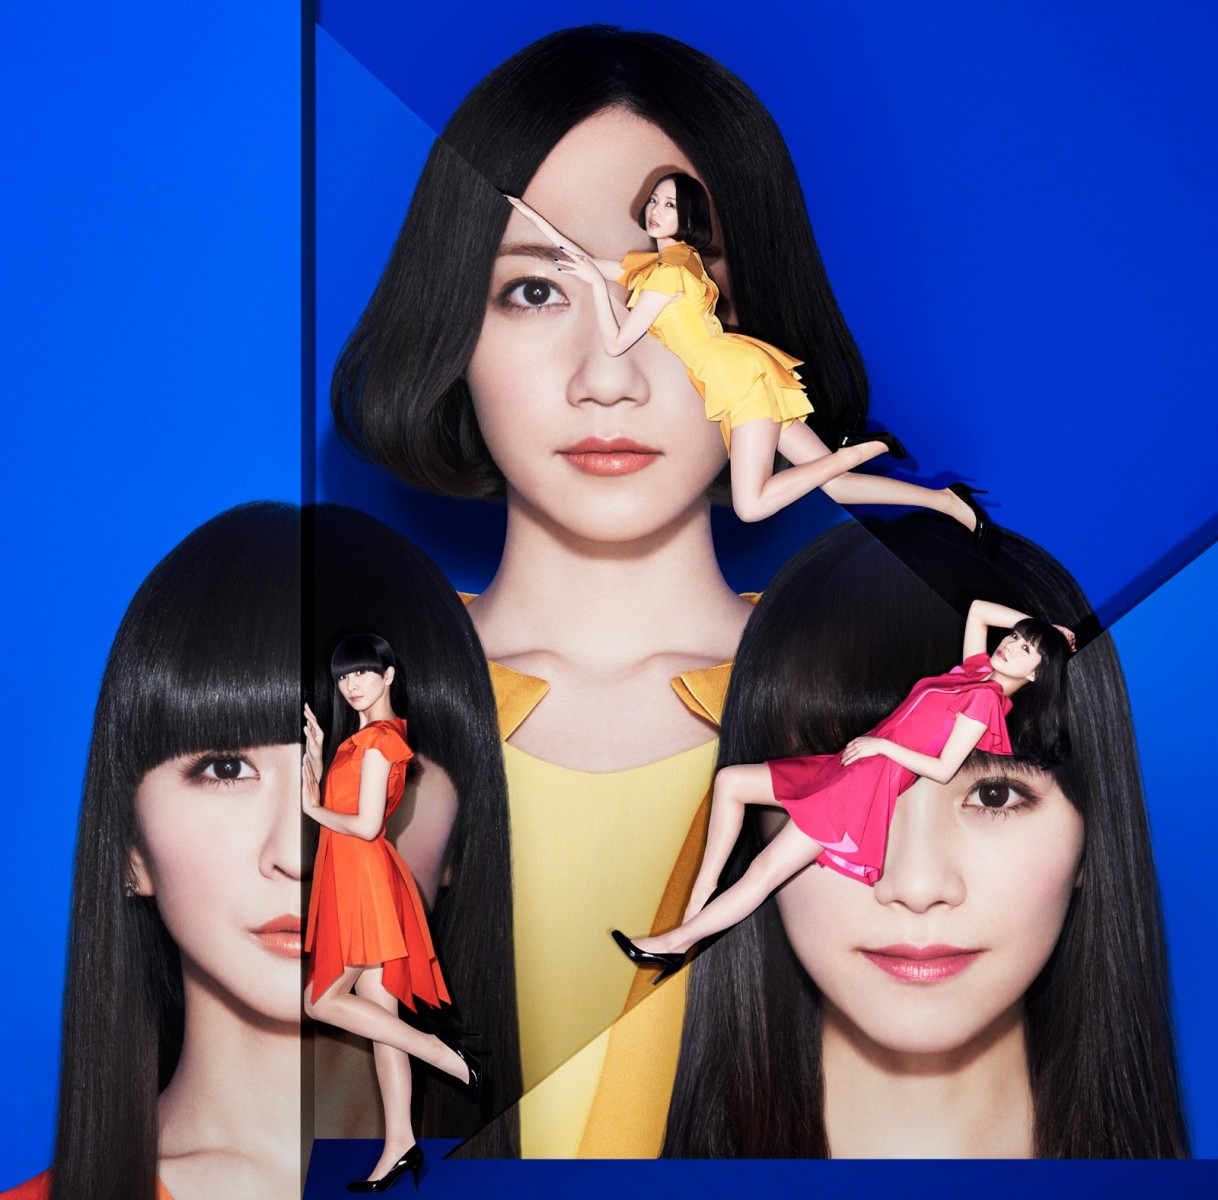 Perfume Celebrate Vinyl and Blu-ray Release with an Official Gallery Exhibition in London, 6-7 August